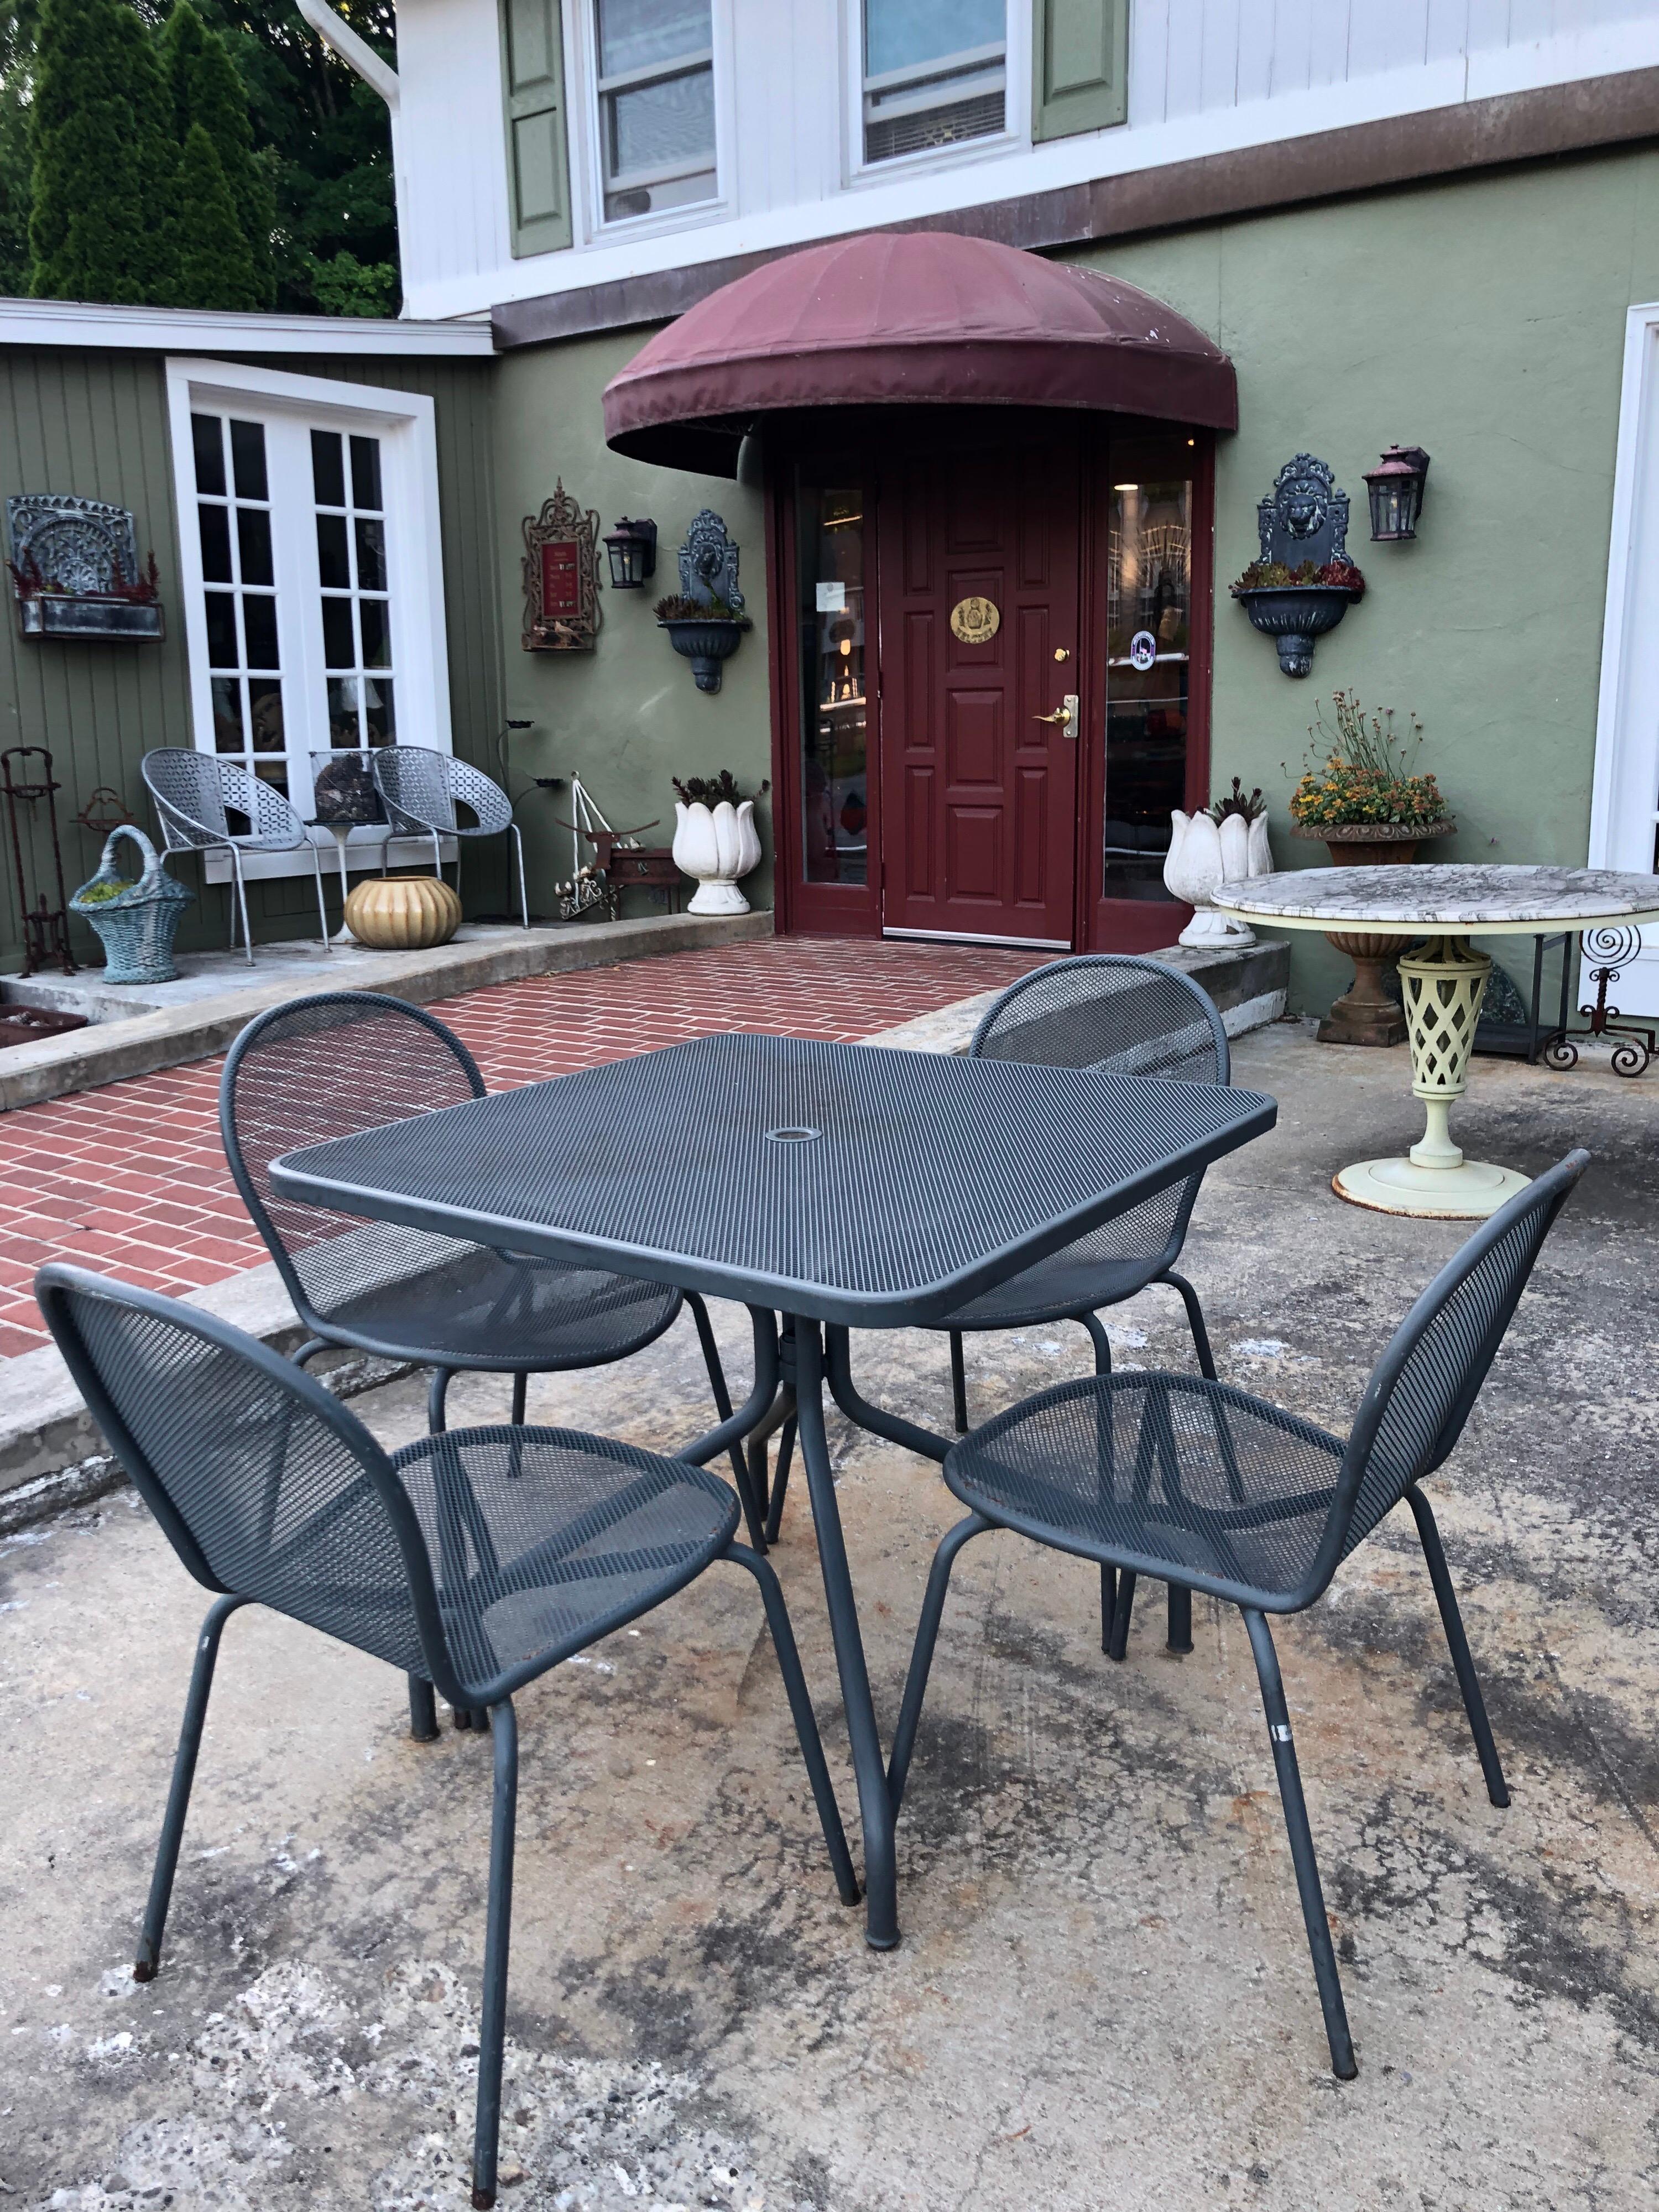 EMU Italian modern Patio set in gray. Sturdy and Minimalist in design. Square table with umbrella hole.
Perfect for a terrace apartment in the City.